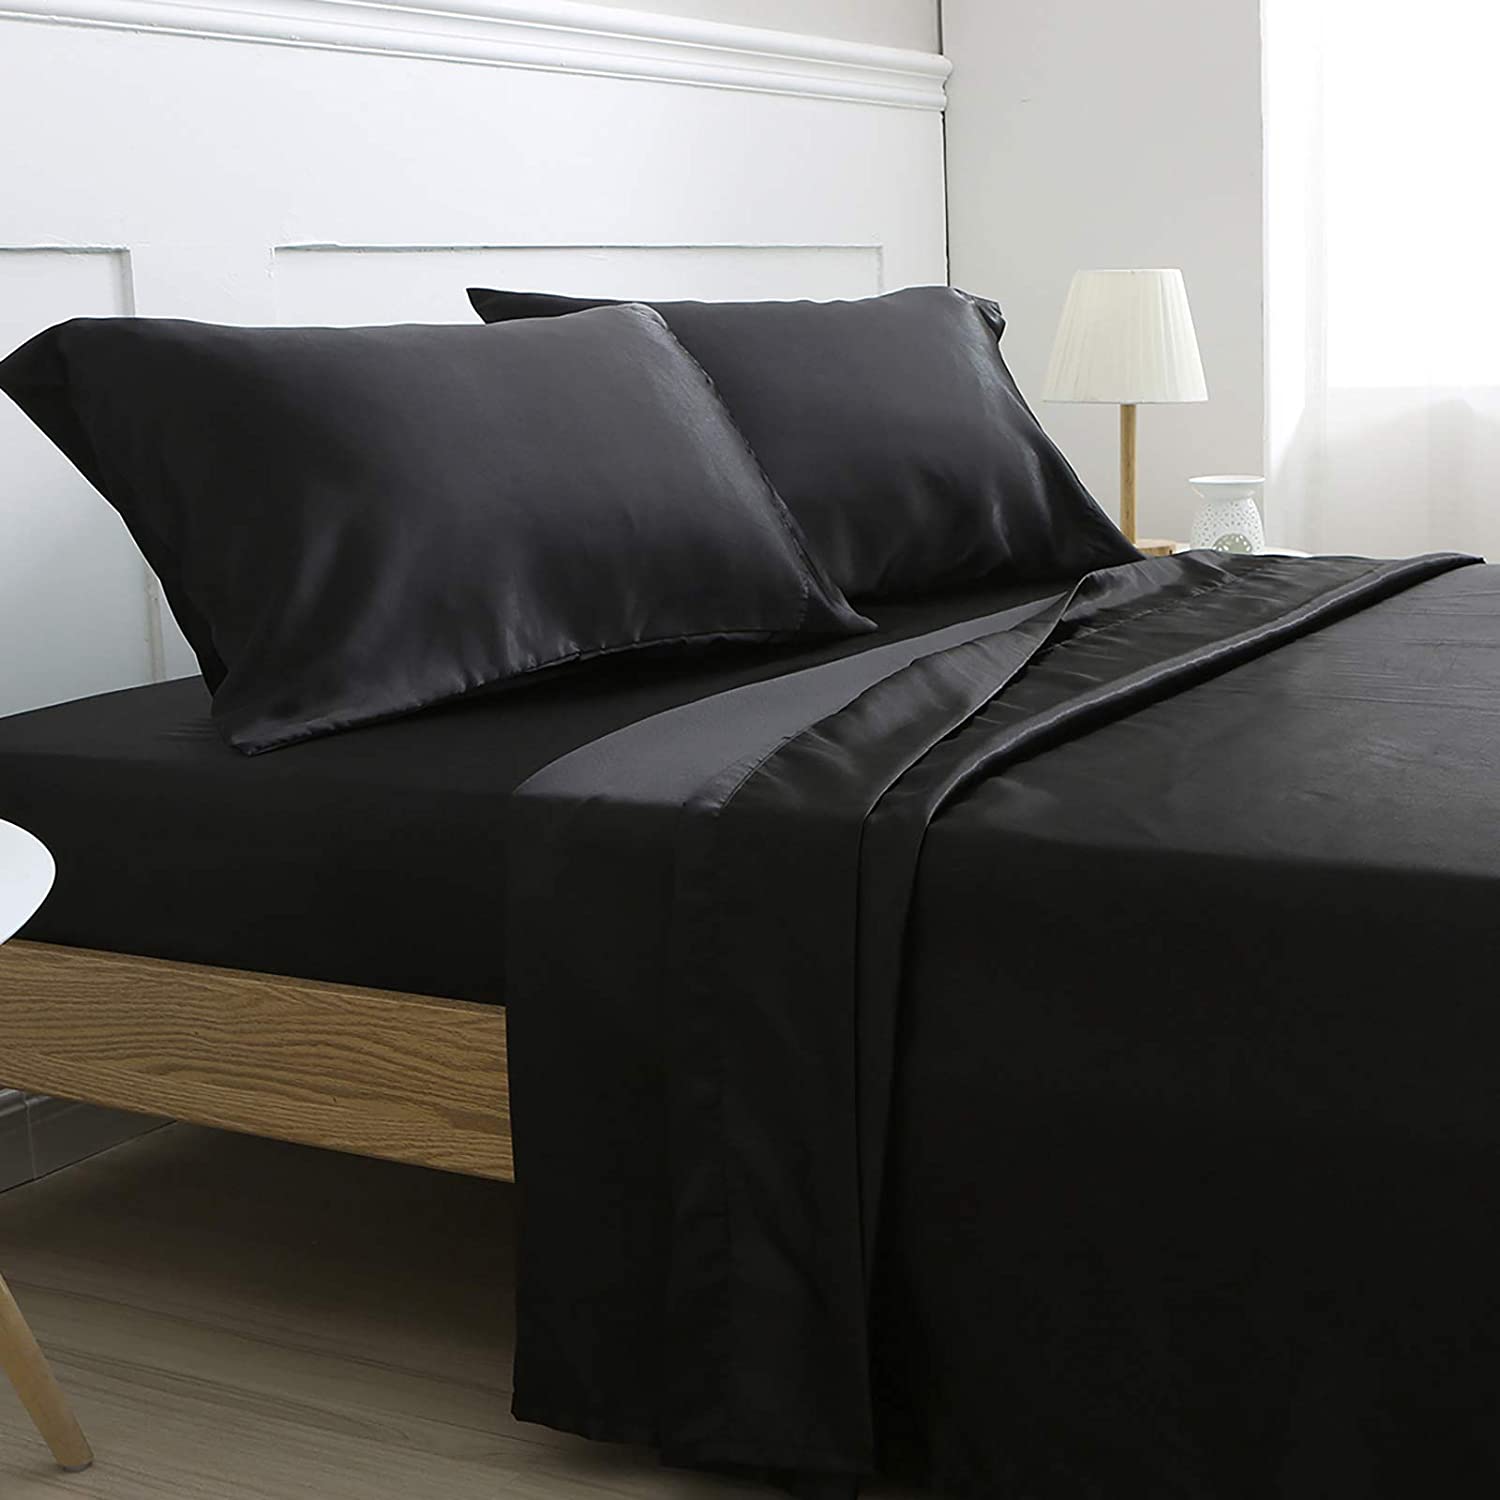 Details about   Vonty Satin Sheets Queen Size Silky Soft Satin Bed Sheets Grey Satin Sheet Set, 